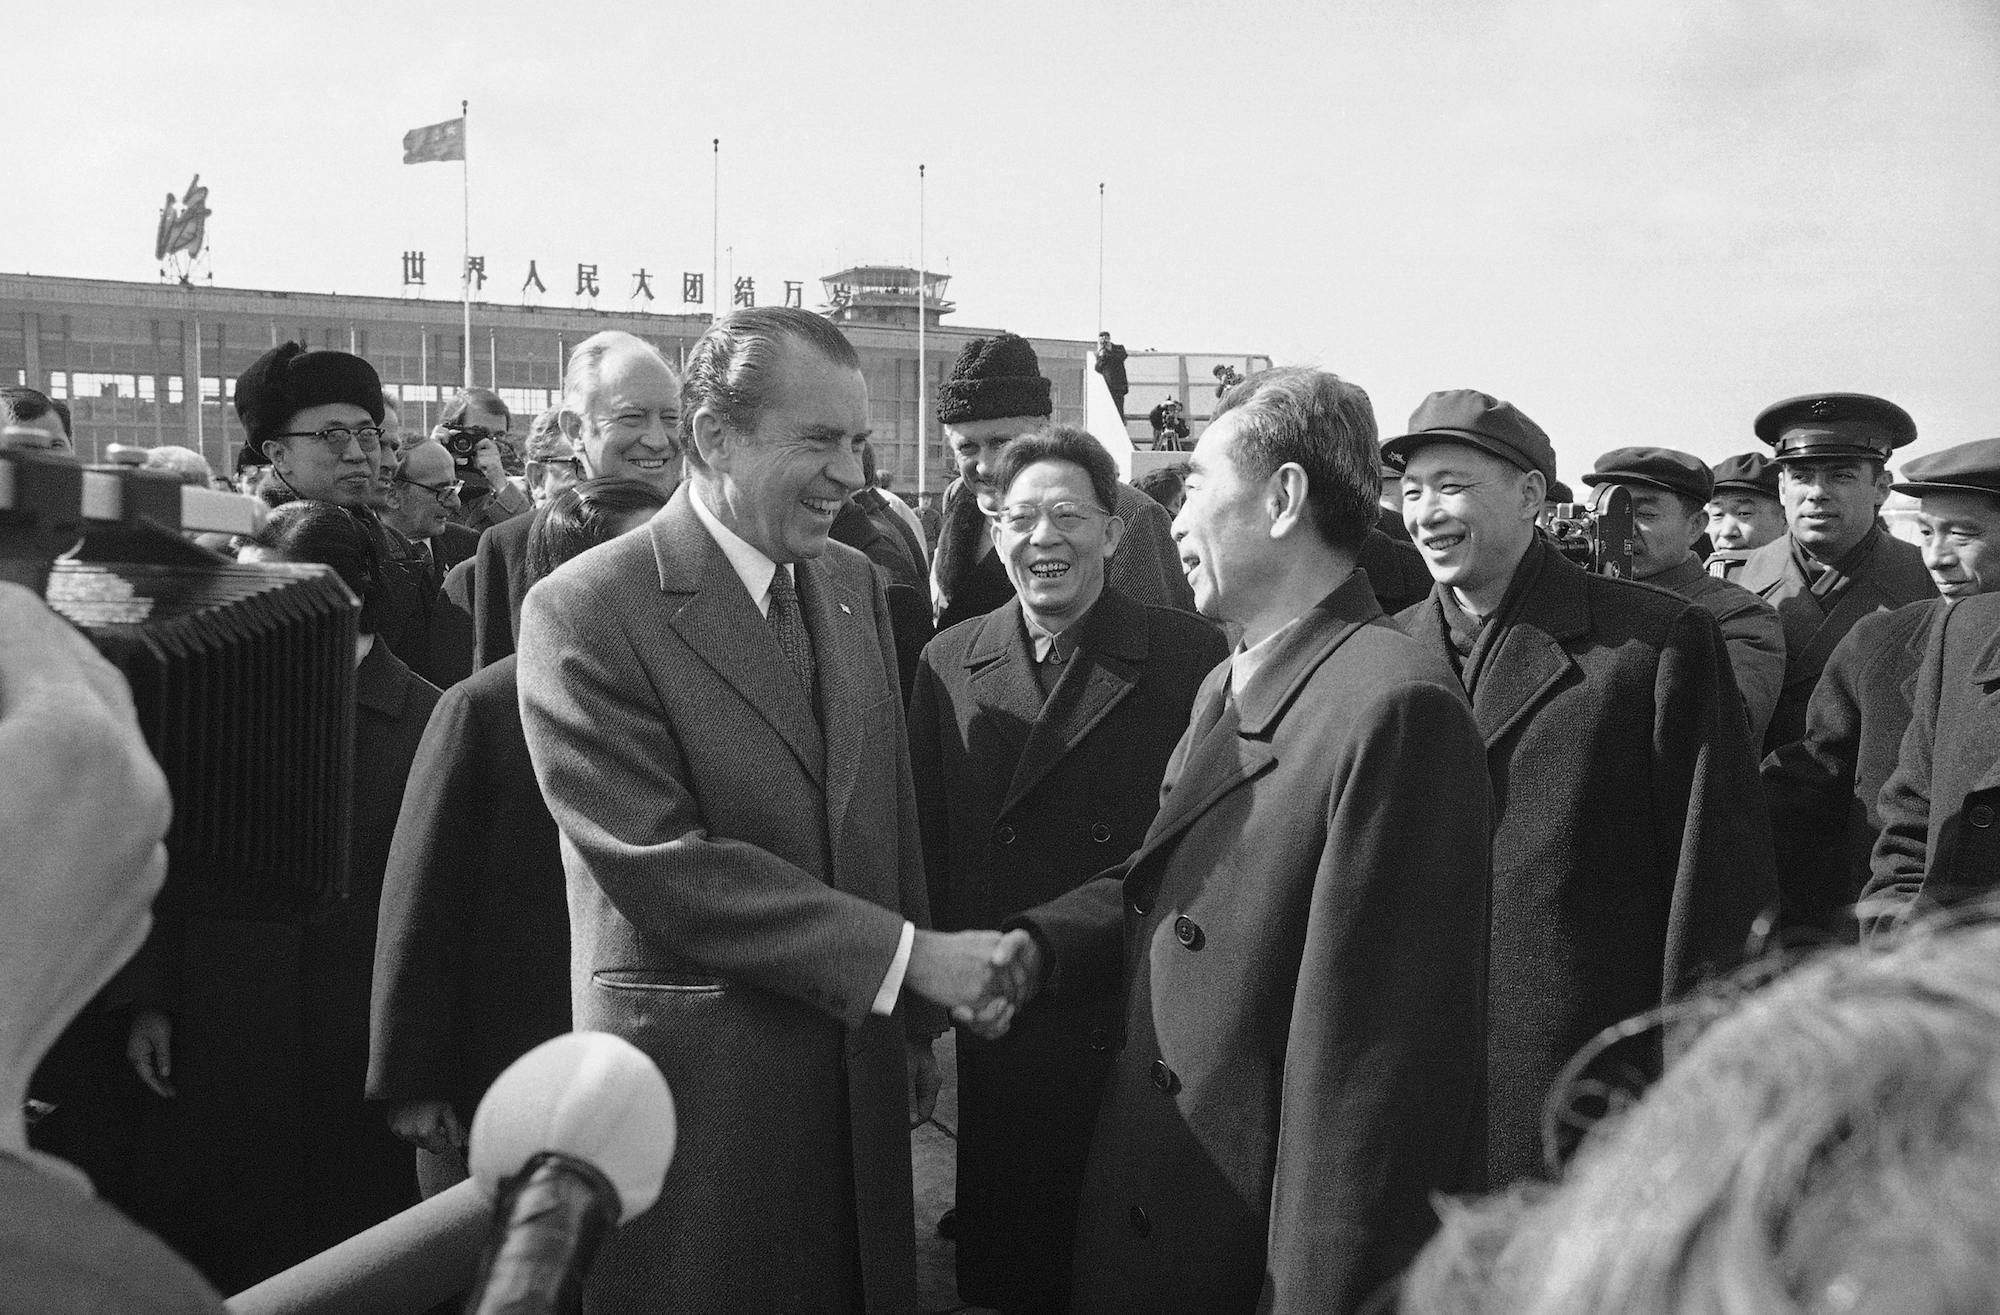 Richard Nixon shakes hands with Chinese Premier Chou En-Lai with smiling lookers surrounding them